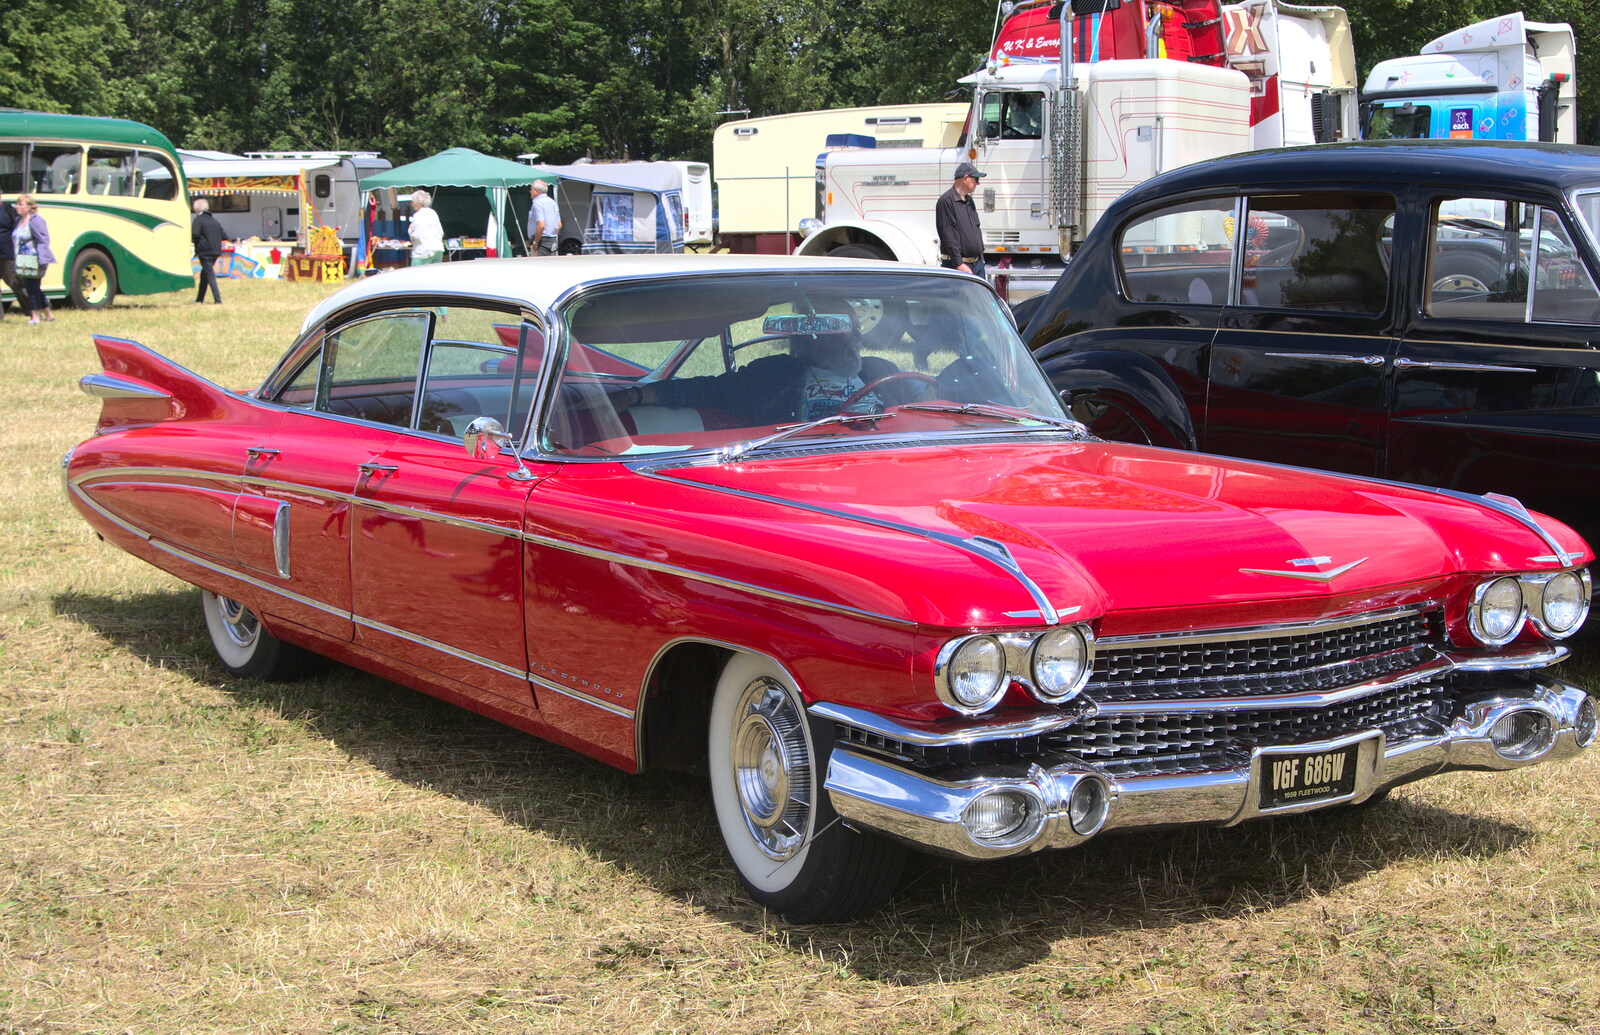 A huge whale-like Cadillac from A Vintage Tractorey Sort of Day, Palgrave, Suffolk - 21st June 2015